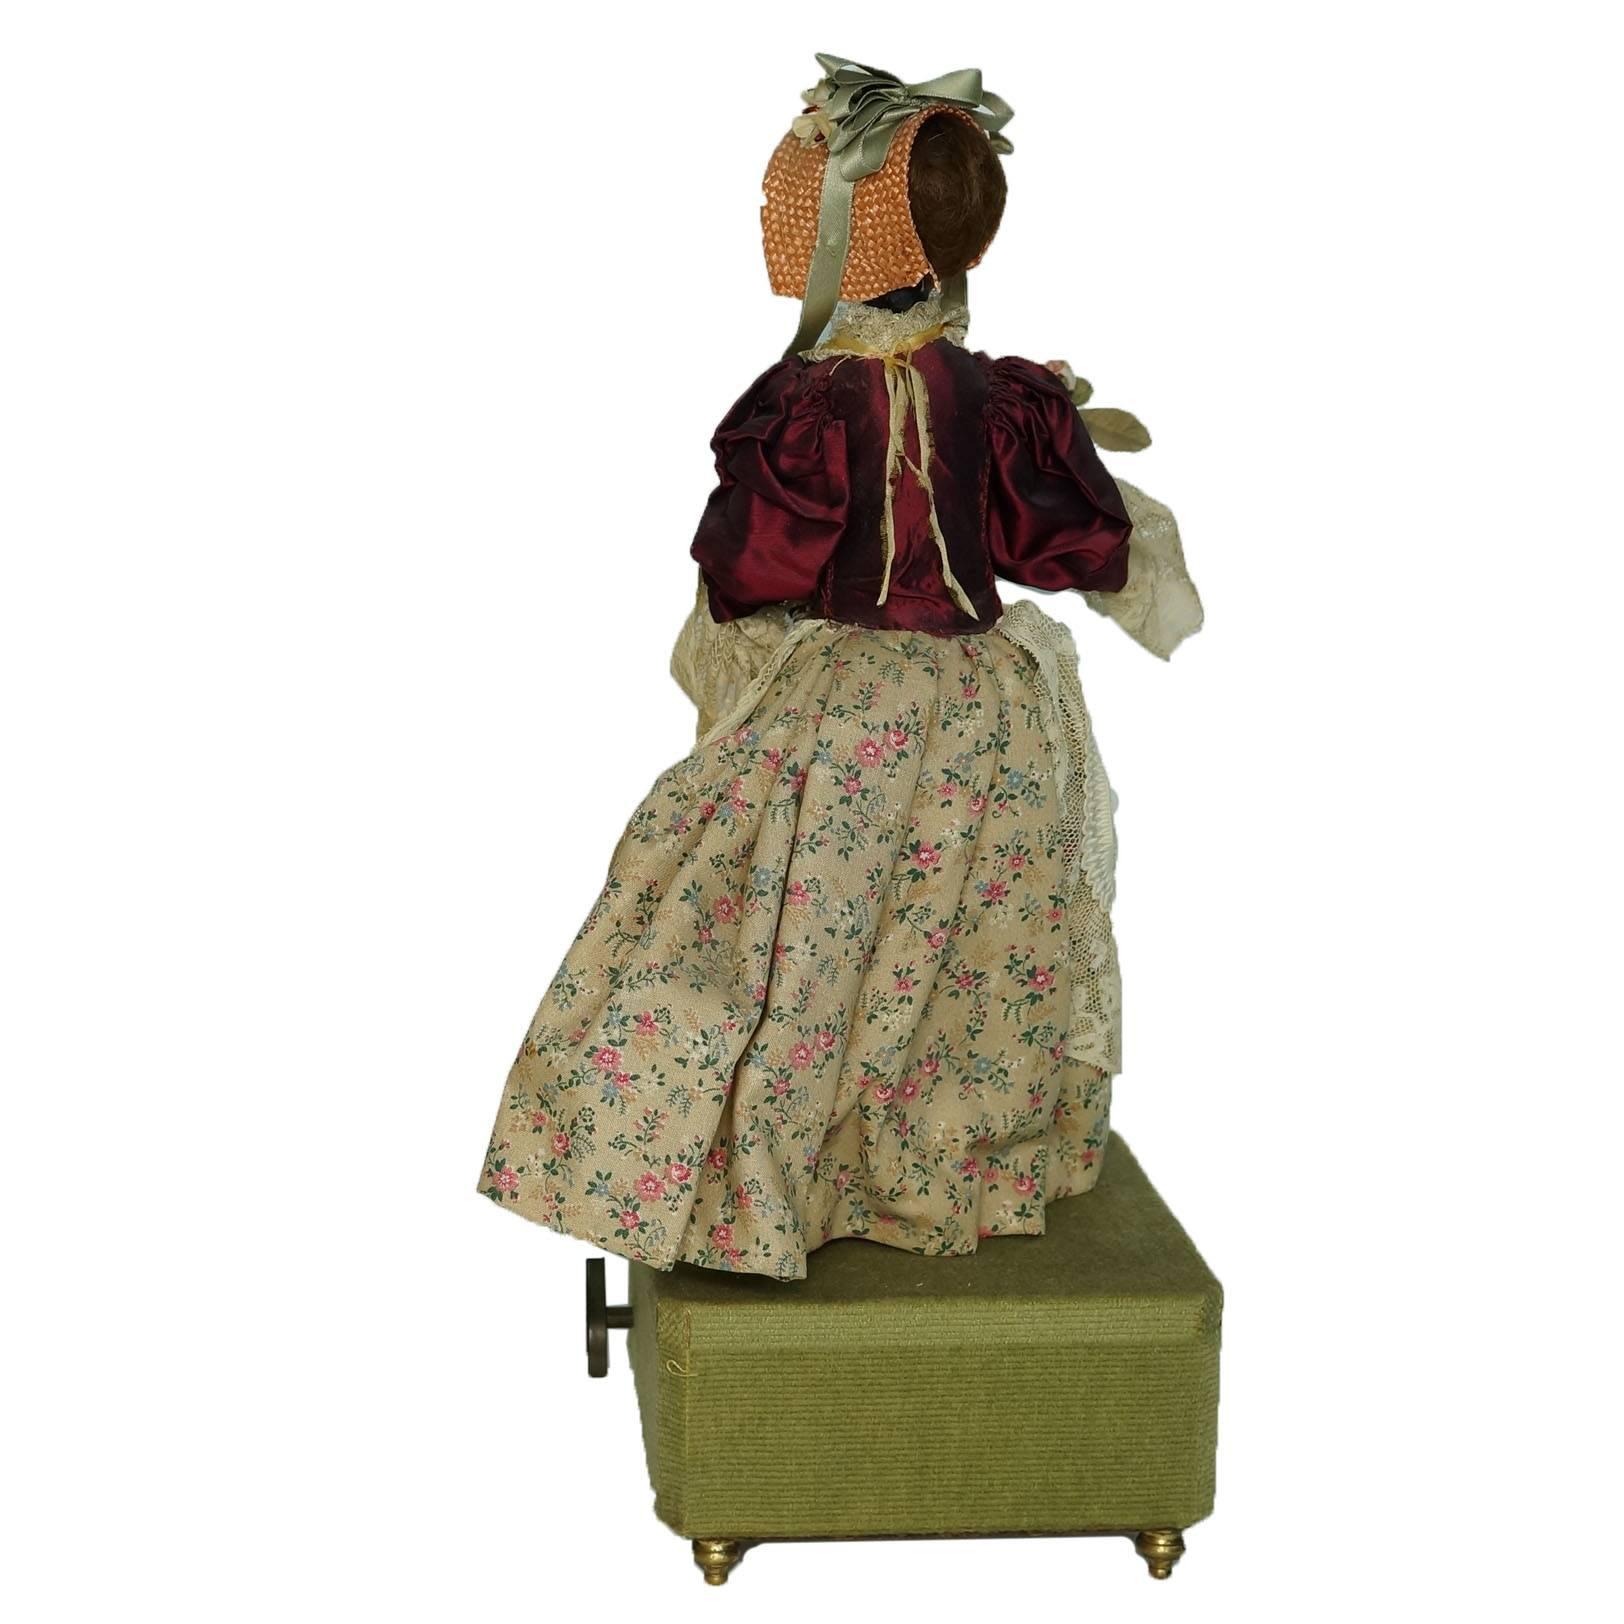 20th Century Automaton Figure of a Standing Girl Holding Flowers Playing Music